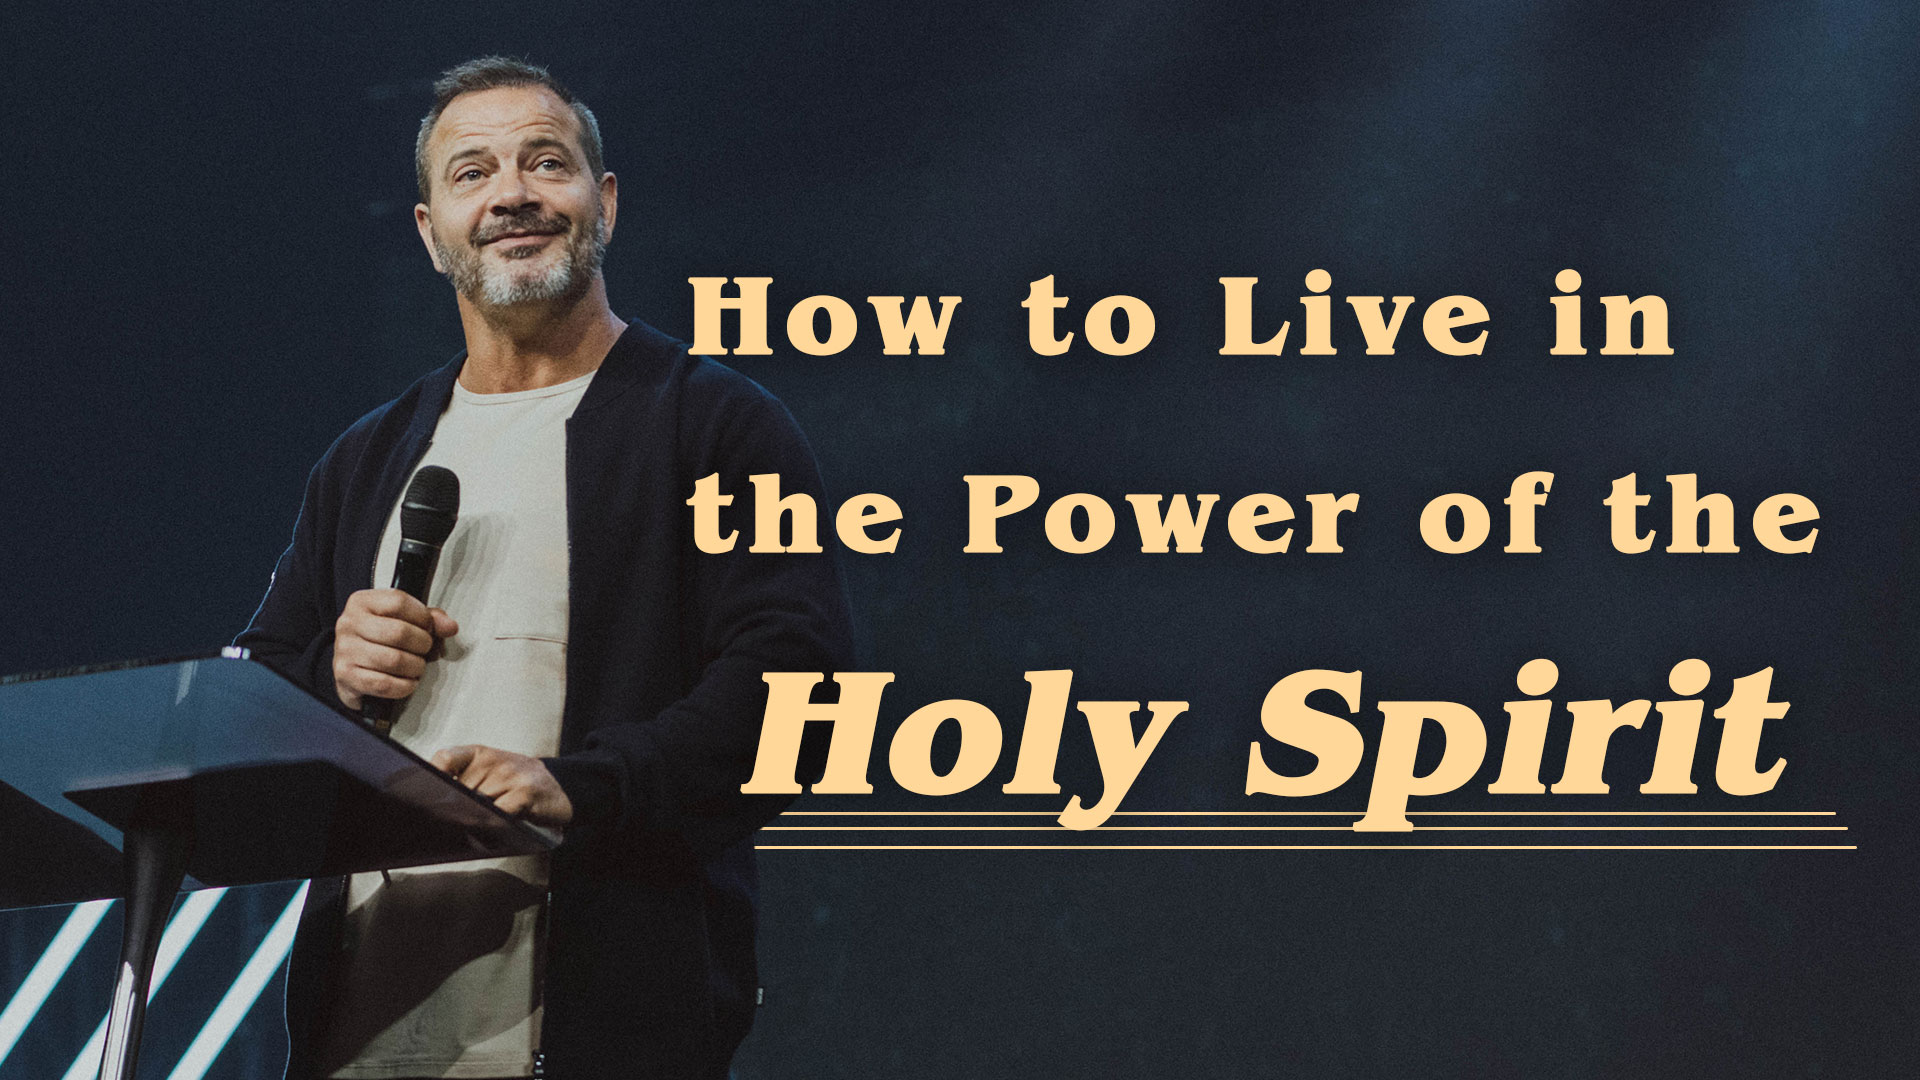 How to Live in the Power of the Holy Spirit